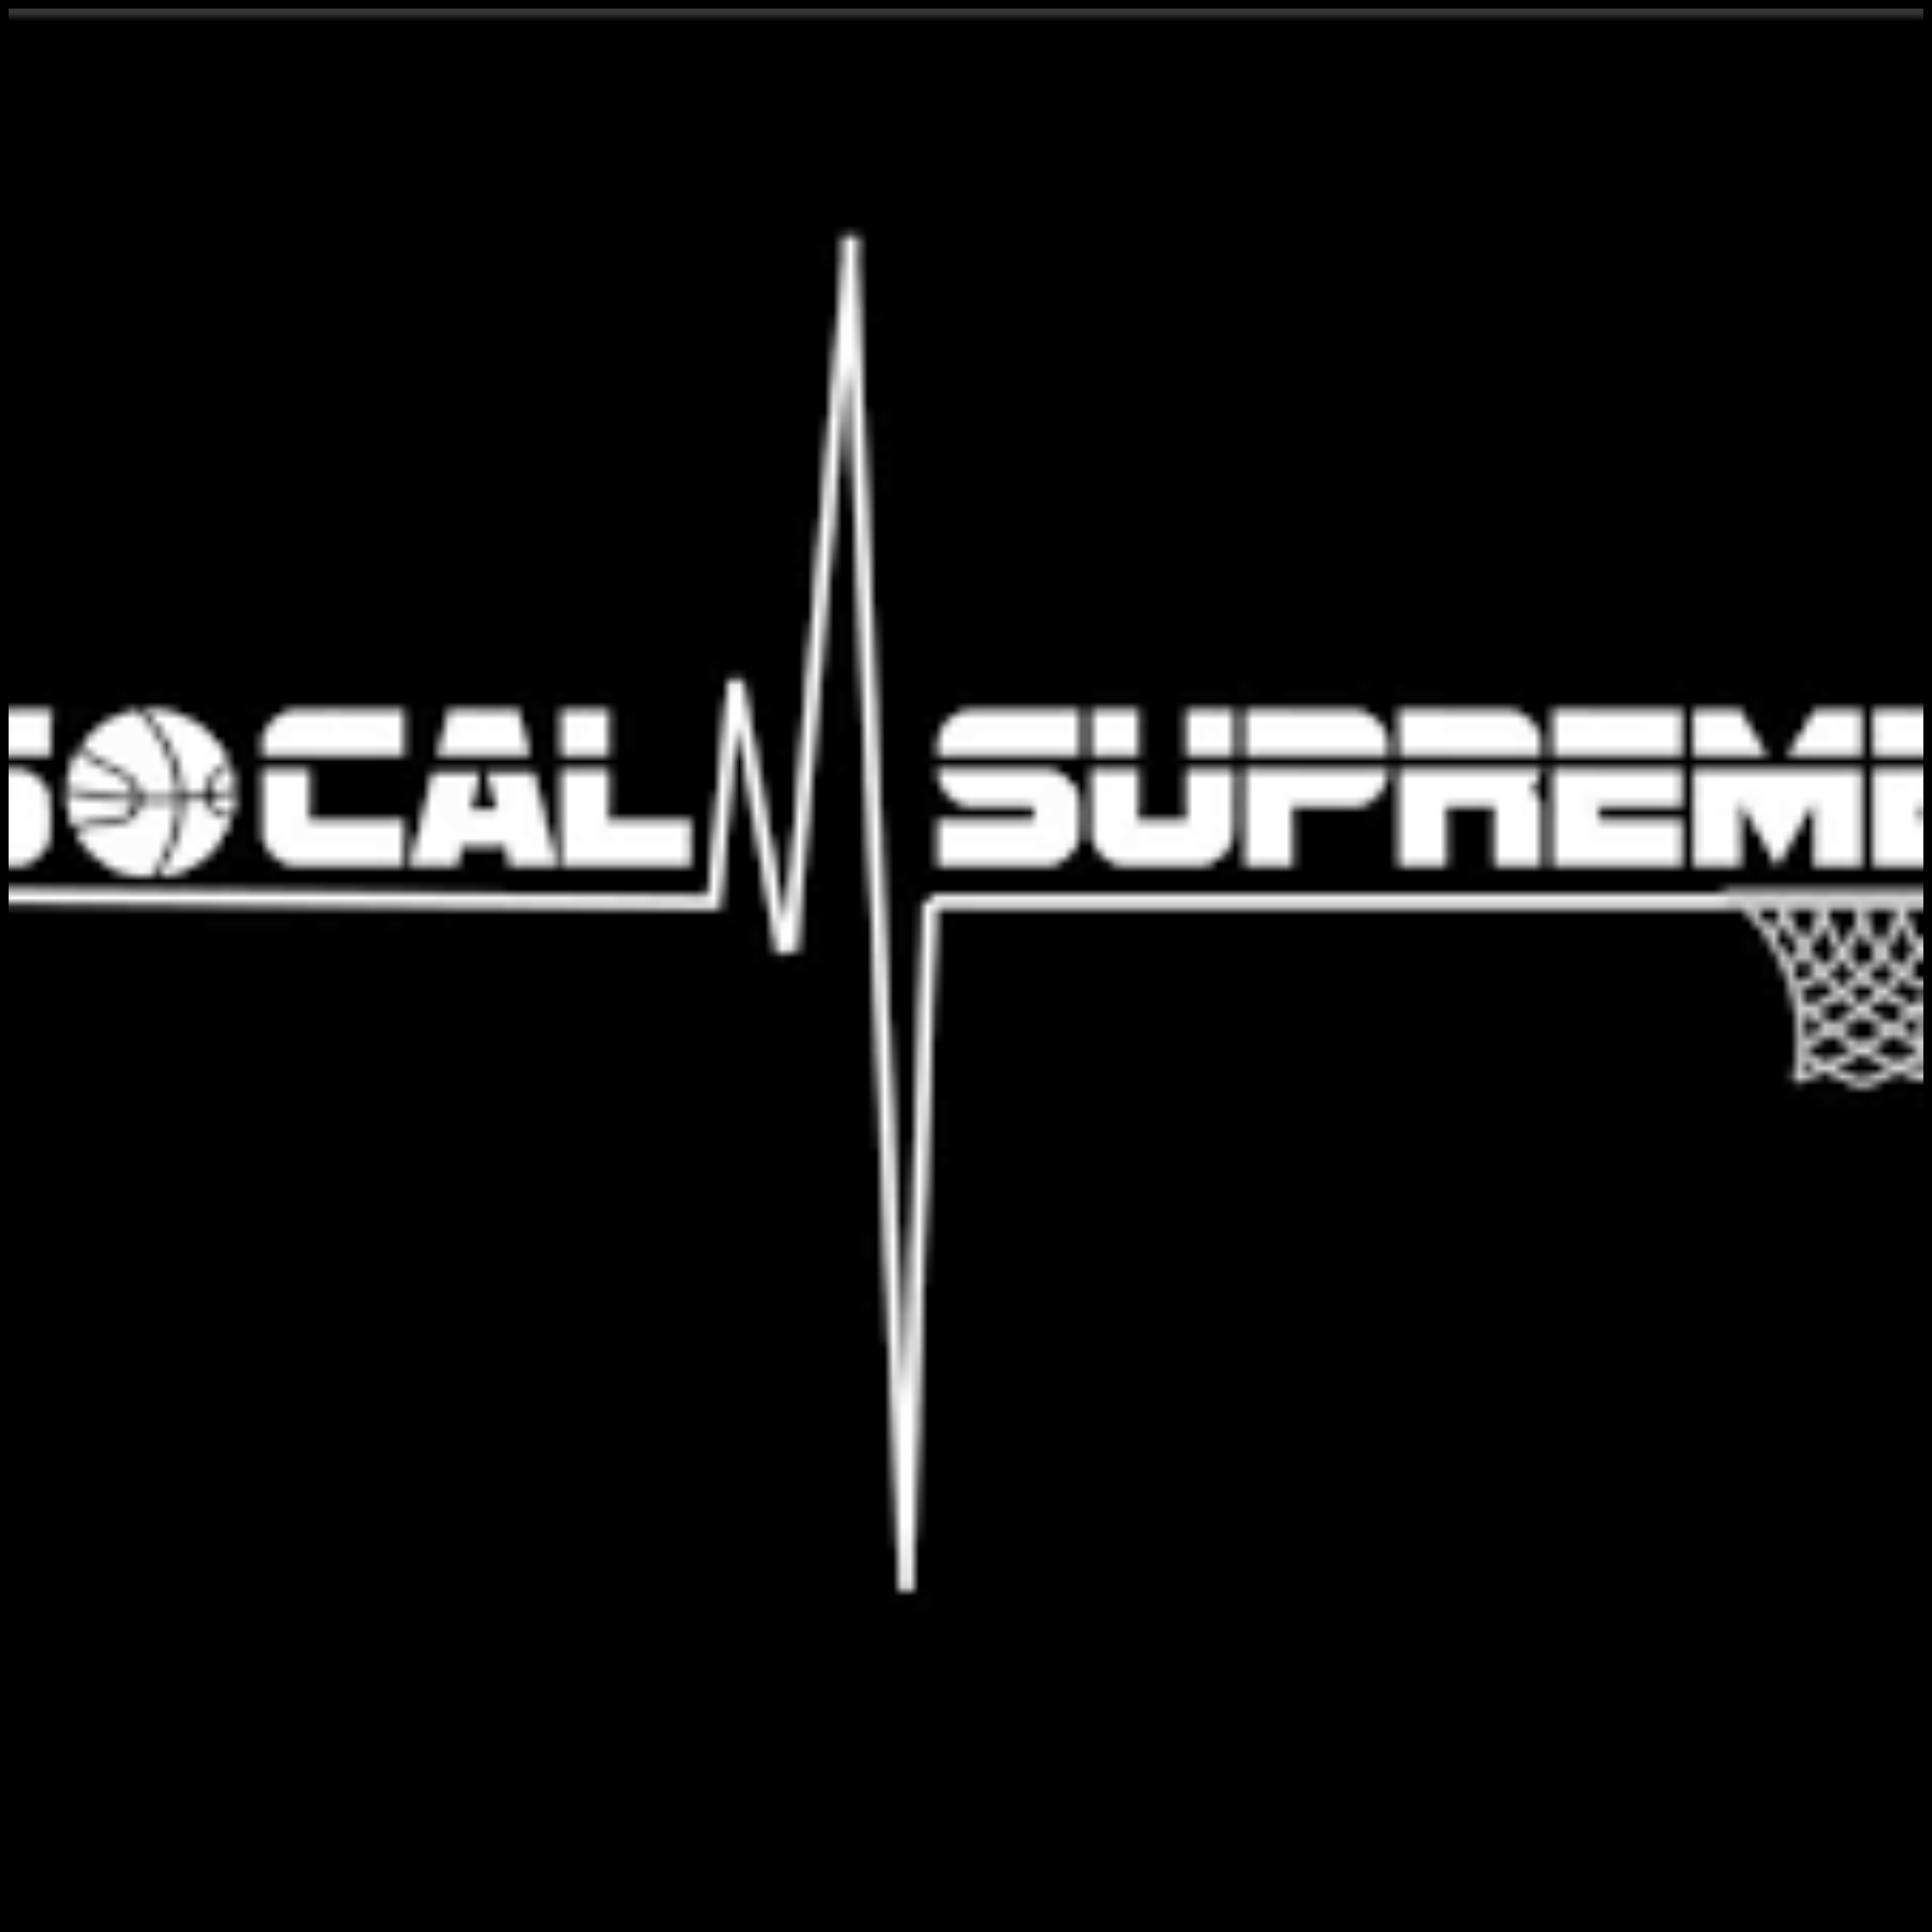 The official logo of SoCal Supreme